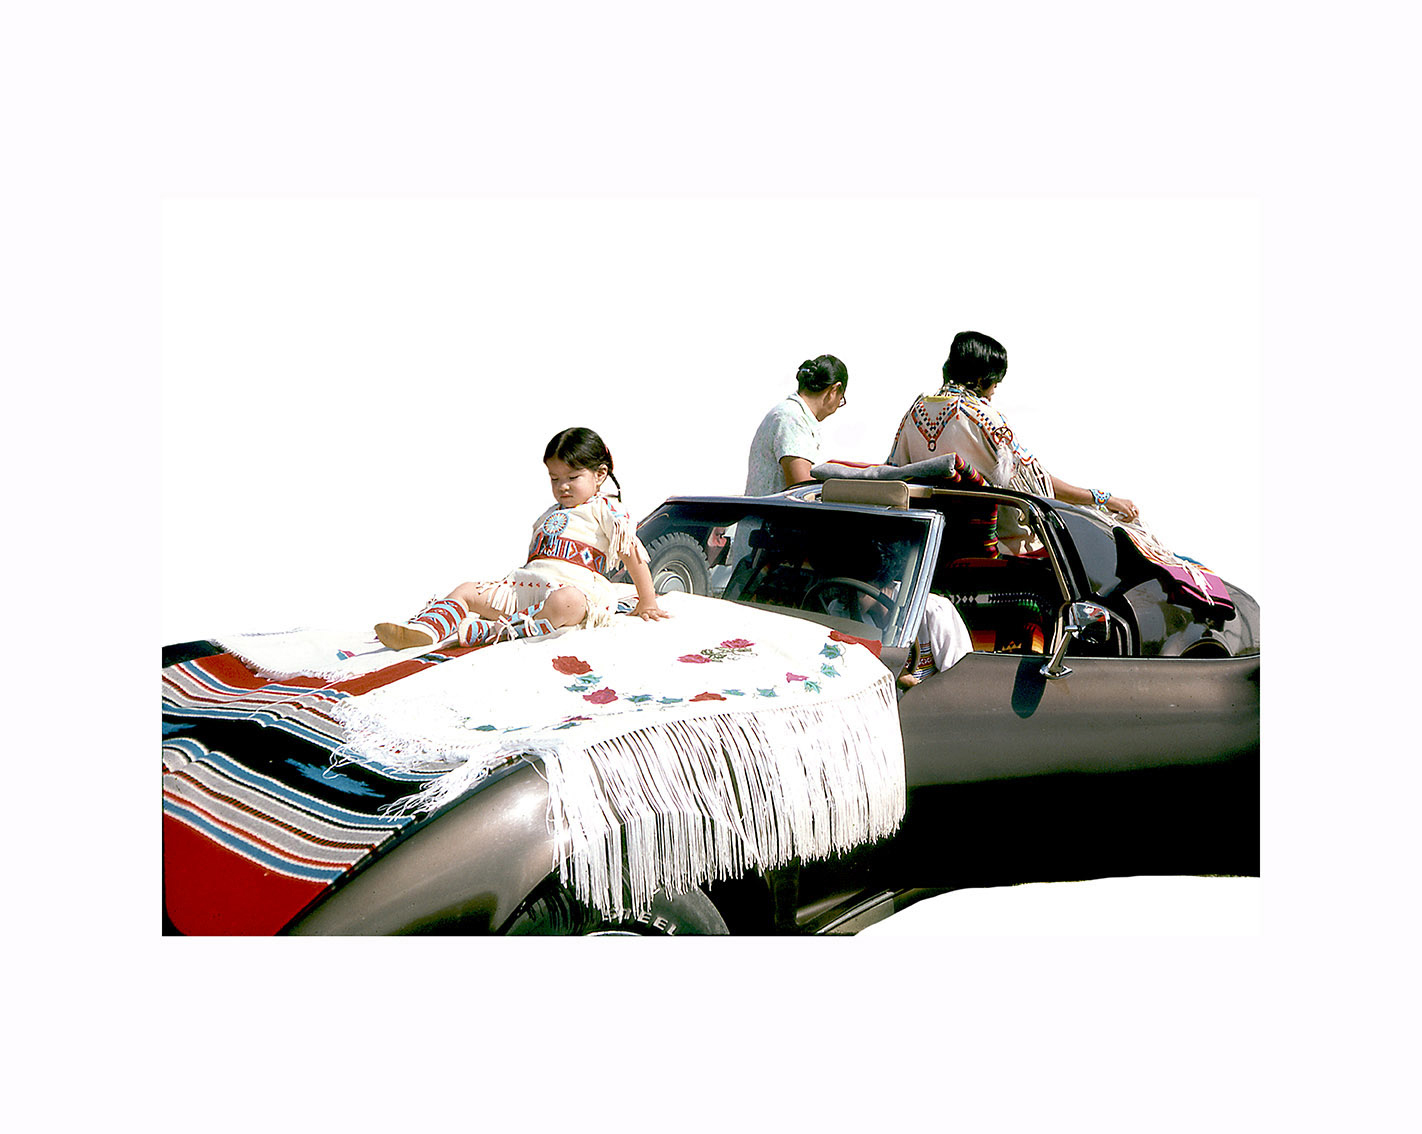  Wendy Red Star,  Grandmother &amp; Parade Corvette , 2014, slide of Crow Fair parade at Crow Agency in the 1970s, archival pigment print. 